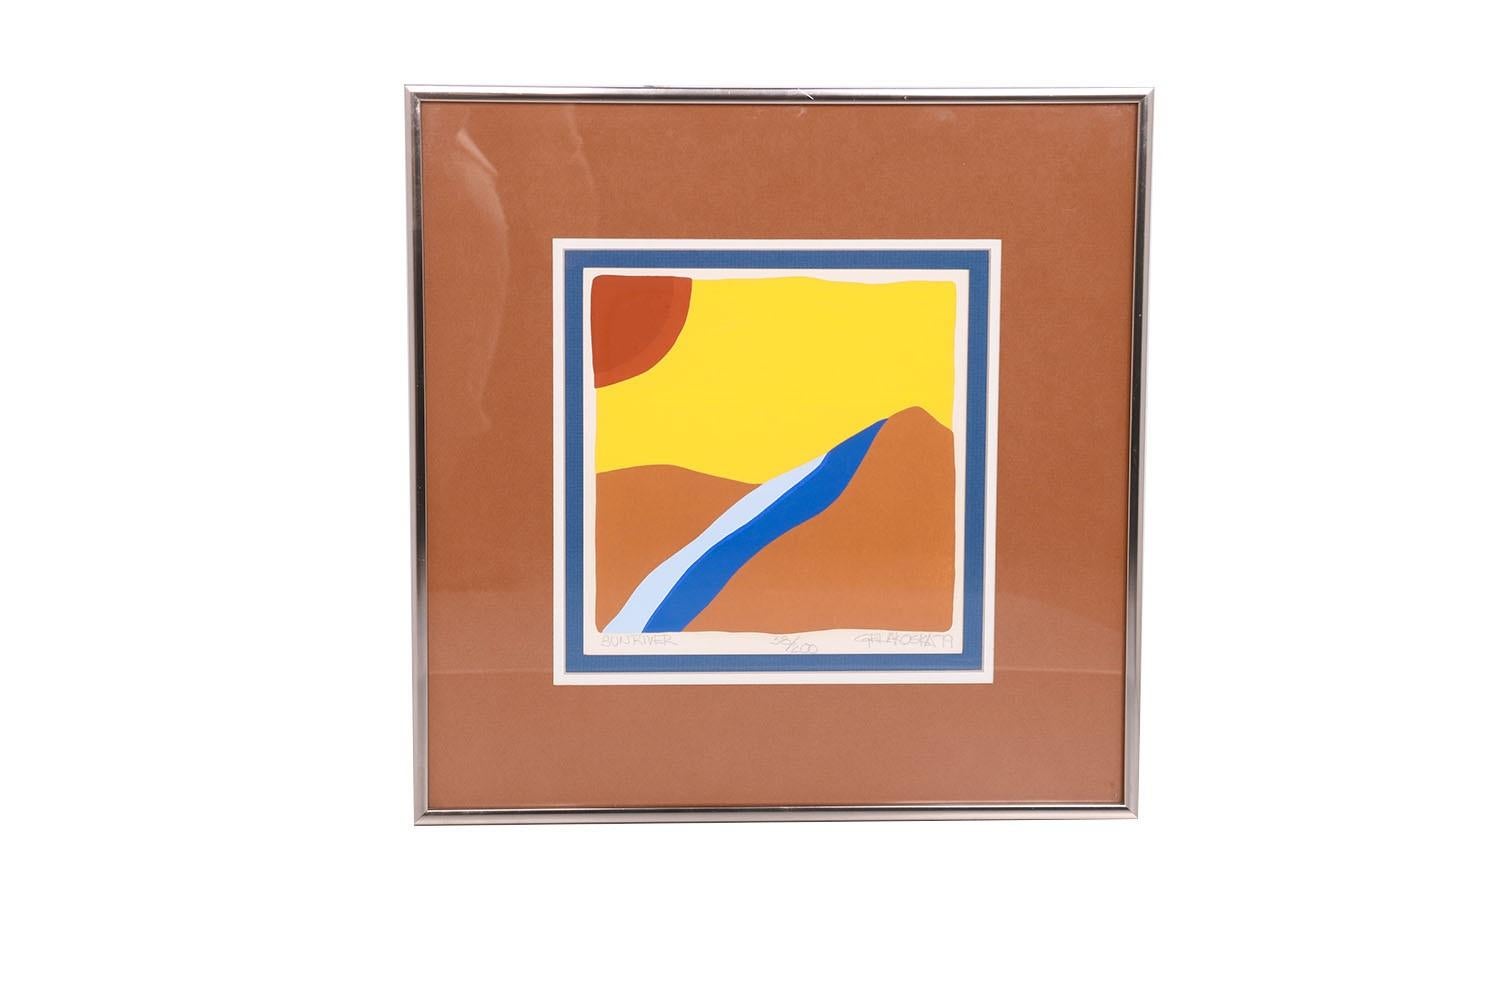 An absolutely gorgeous abstract original silkscreen, Titled “Sunriver” by C. Daniel Gelakoska. Hand signed, dated in pencil bottom right and numbered in pencil, edition 38/200. Circa 1979. Titled on the bottom left “Sunriver”. Professionally framed